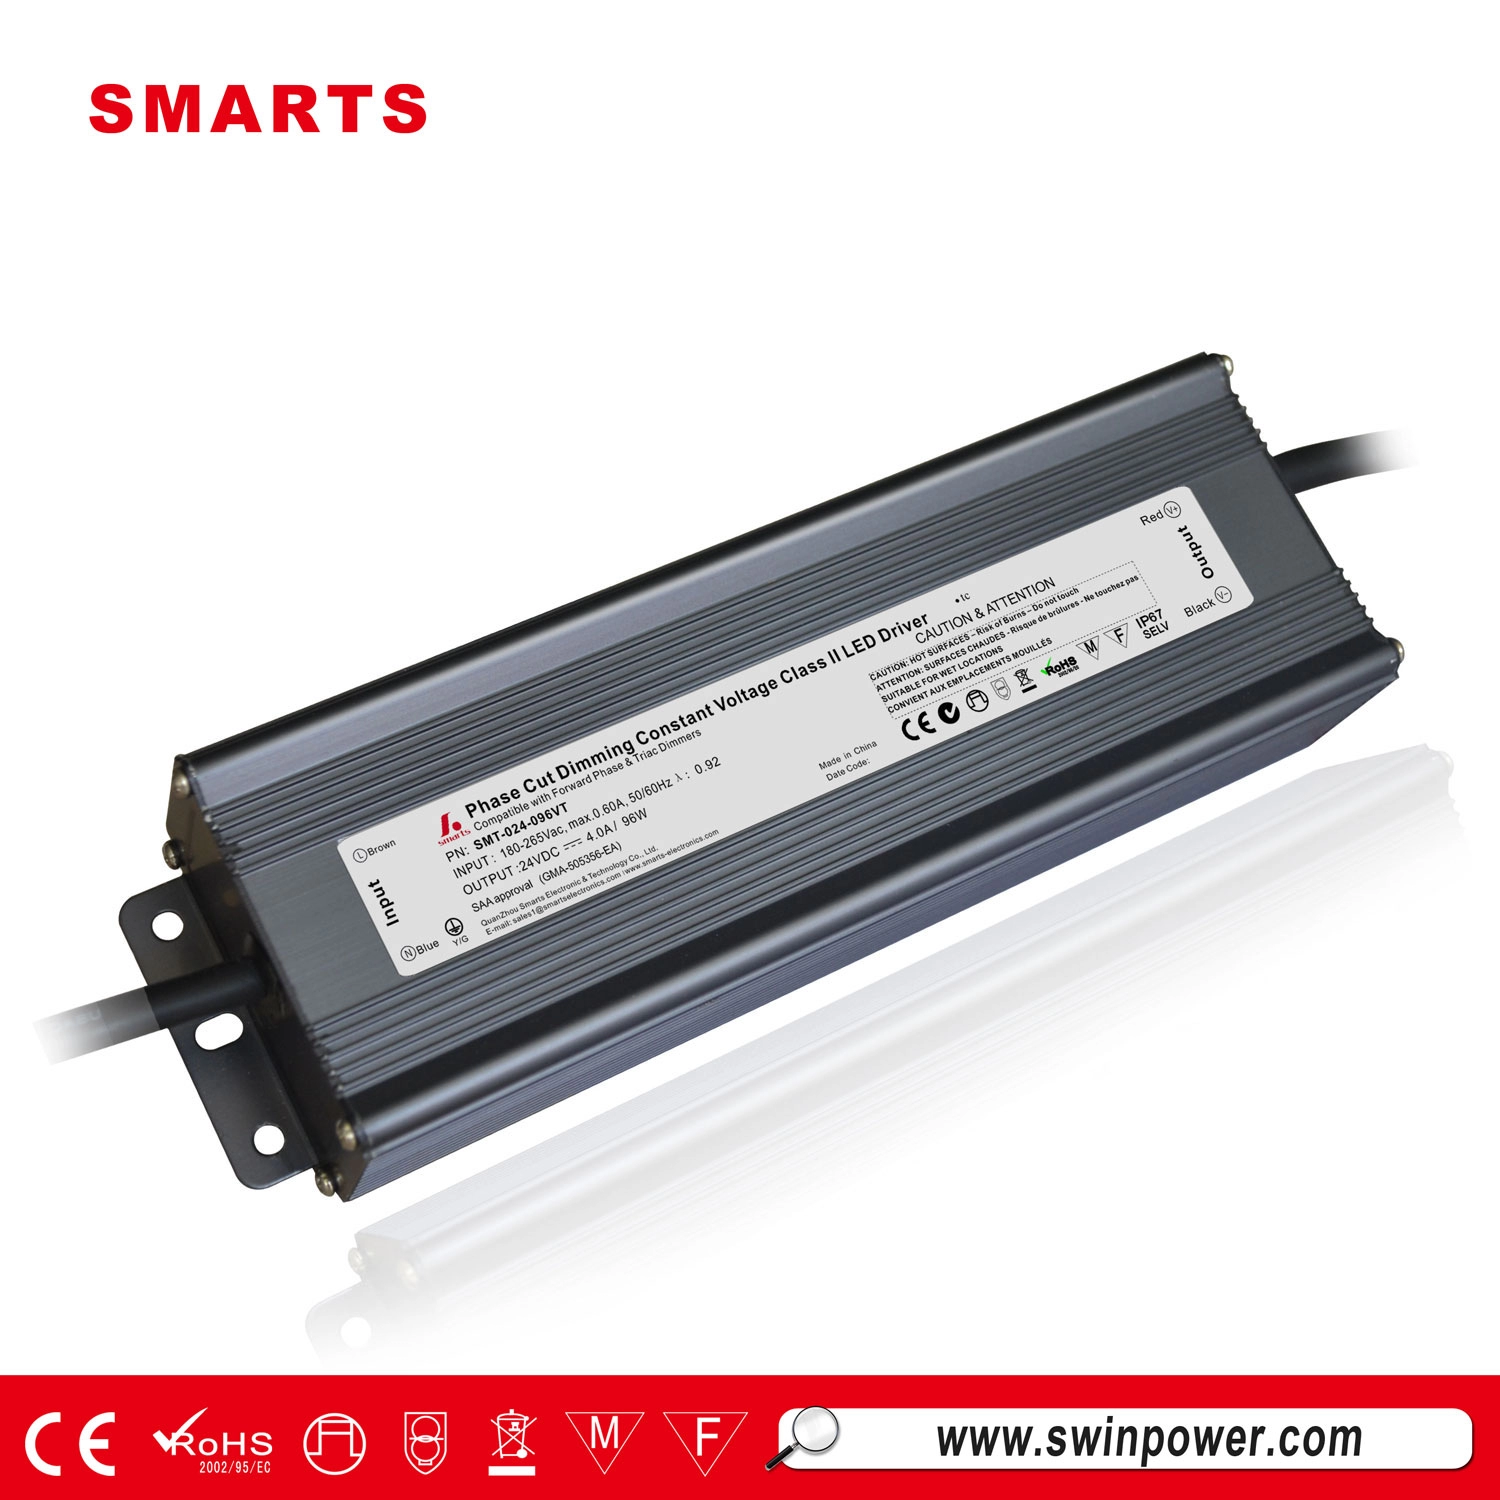 24v dimmable led power supply kelas 2 ac dc 4a led driver